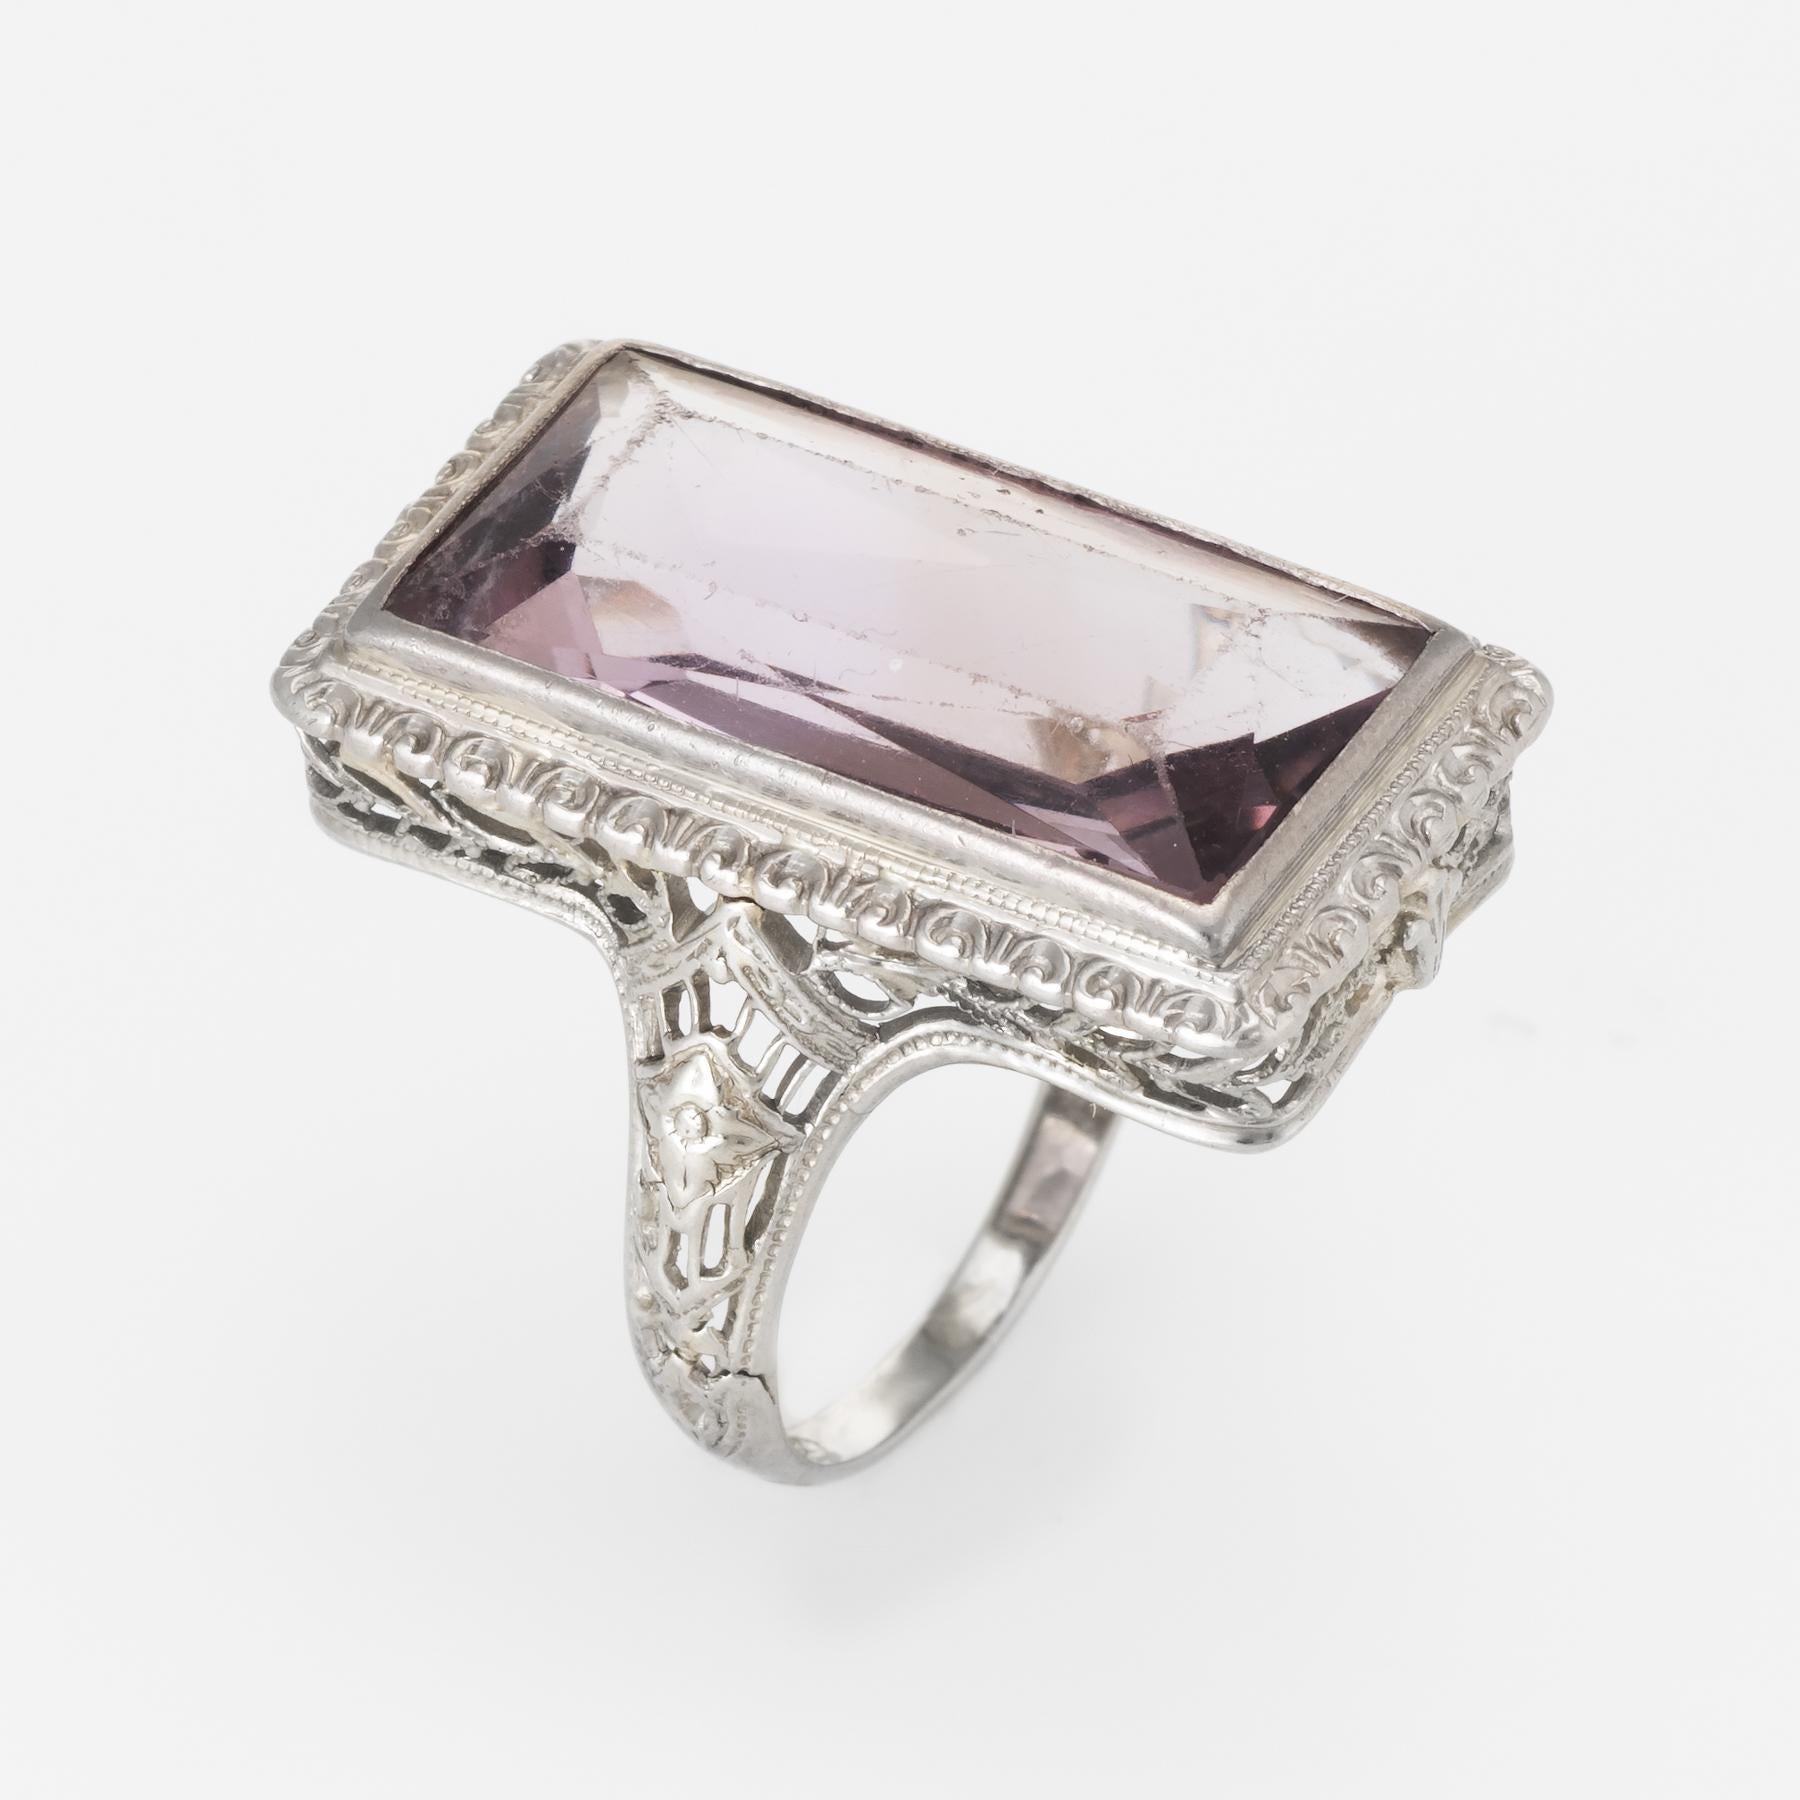 Finely detailed vintage Art Deco era ring (circa 1920s to 1930s), crafted in 18 karat white gold. 

Centrally mounted rectangular cut amethyst measures 19mm x 10mm (estimated at 11 carats). Note: light surface abrasions to the amethyst. 

Lacy